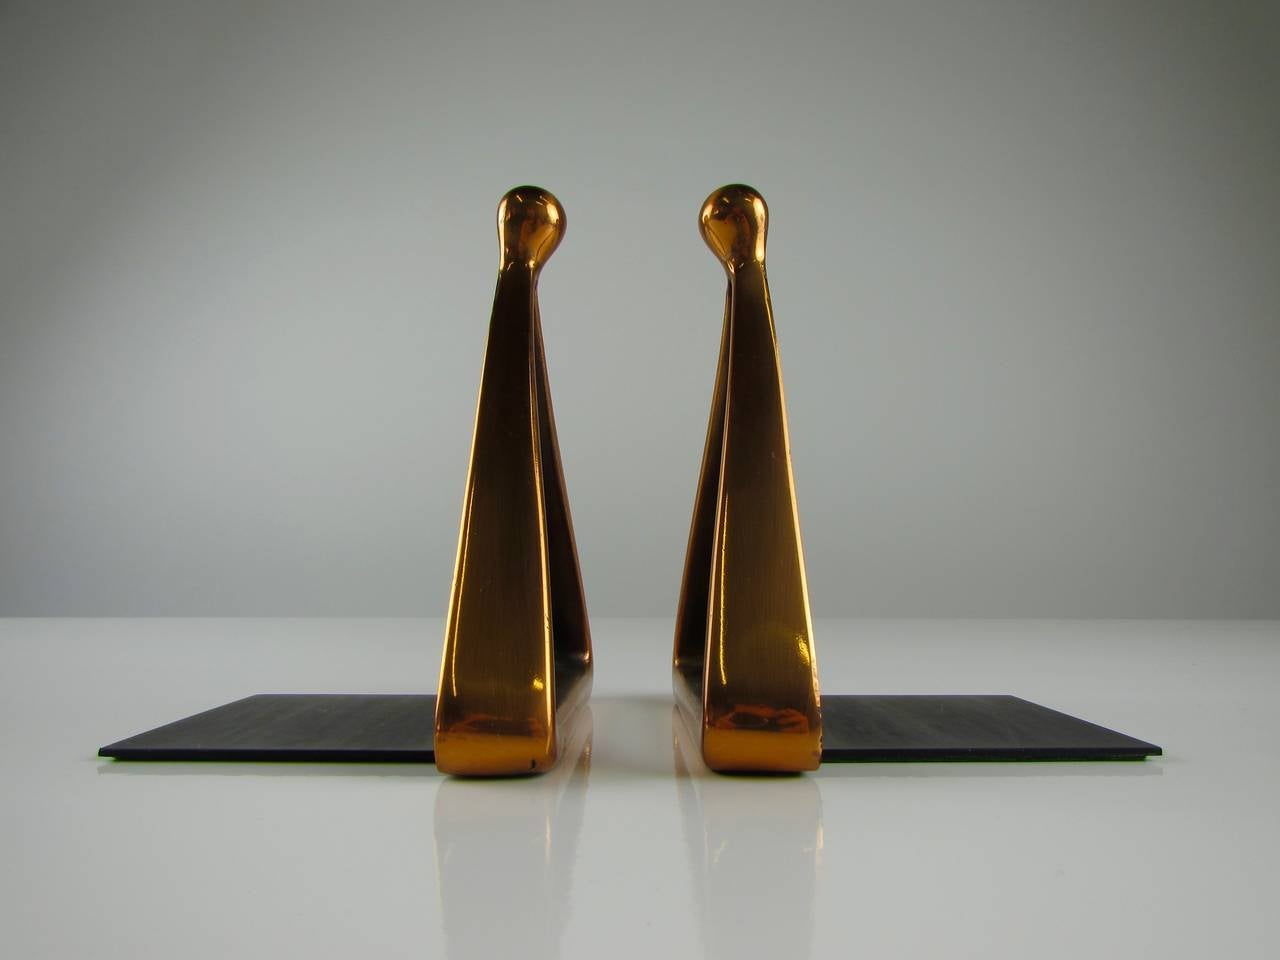 Pristine Pair of Copper Stirrup Bookends by Ben Seibel for Jenfred Ware, 1950s 1